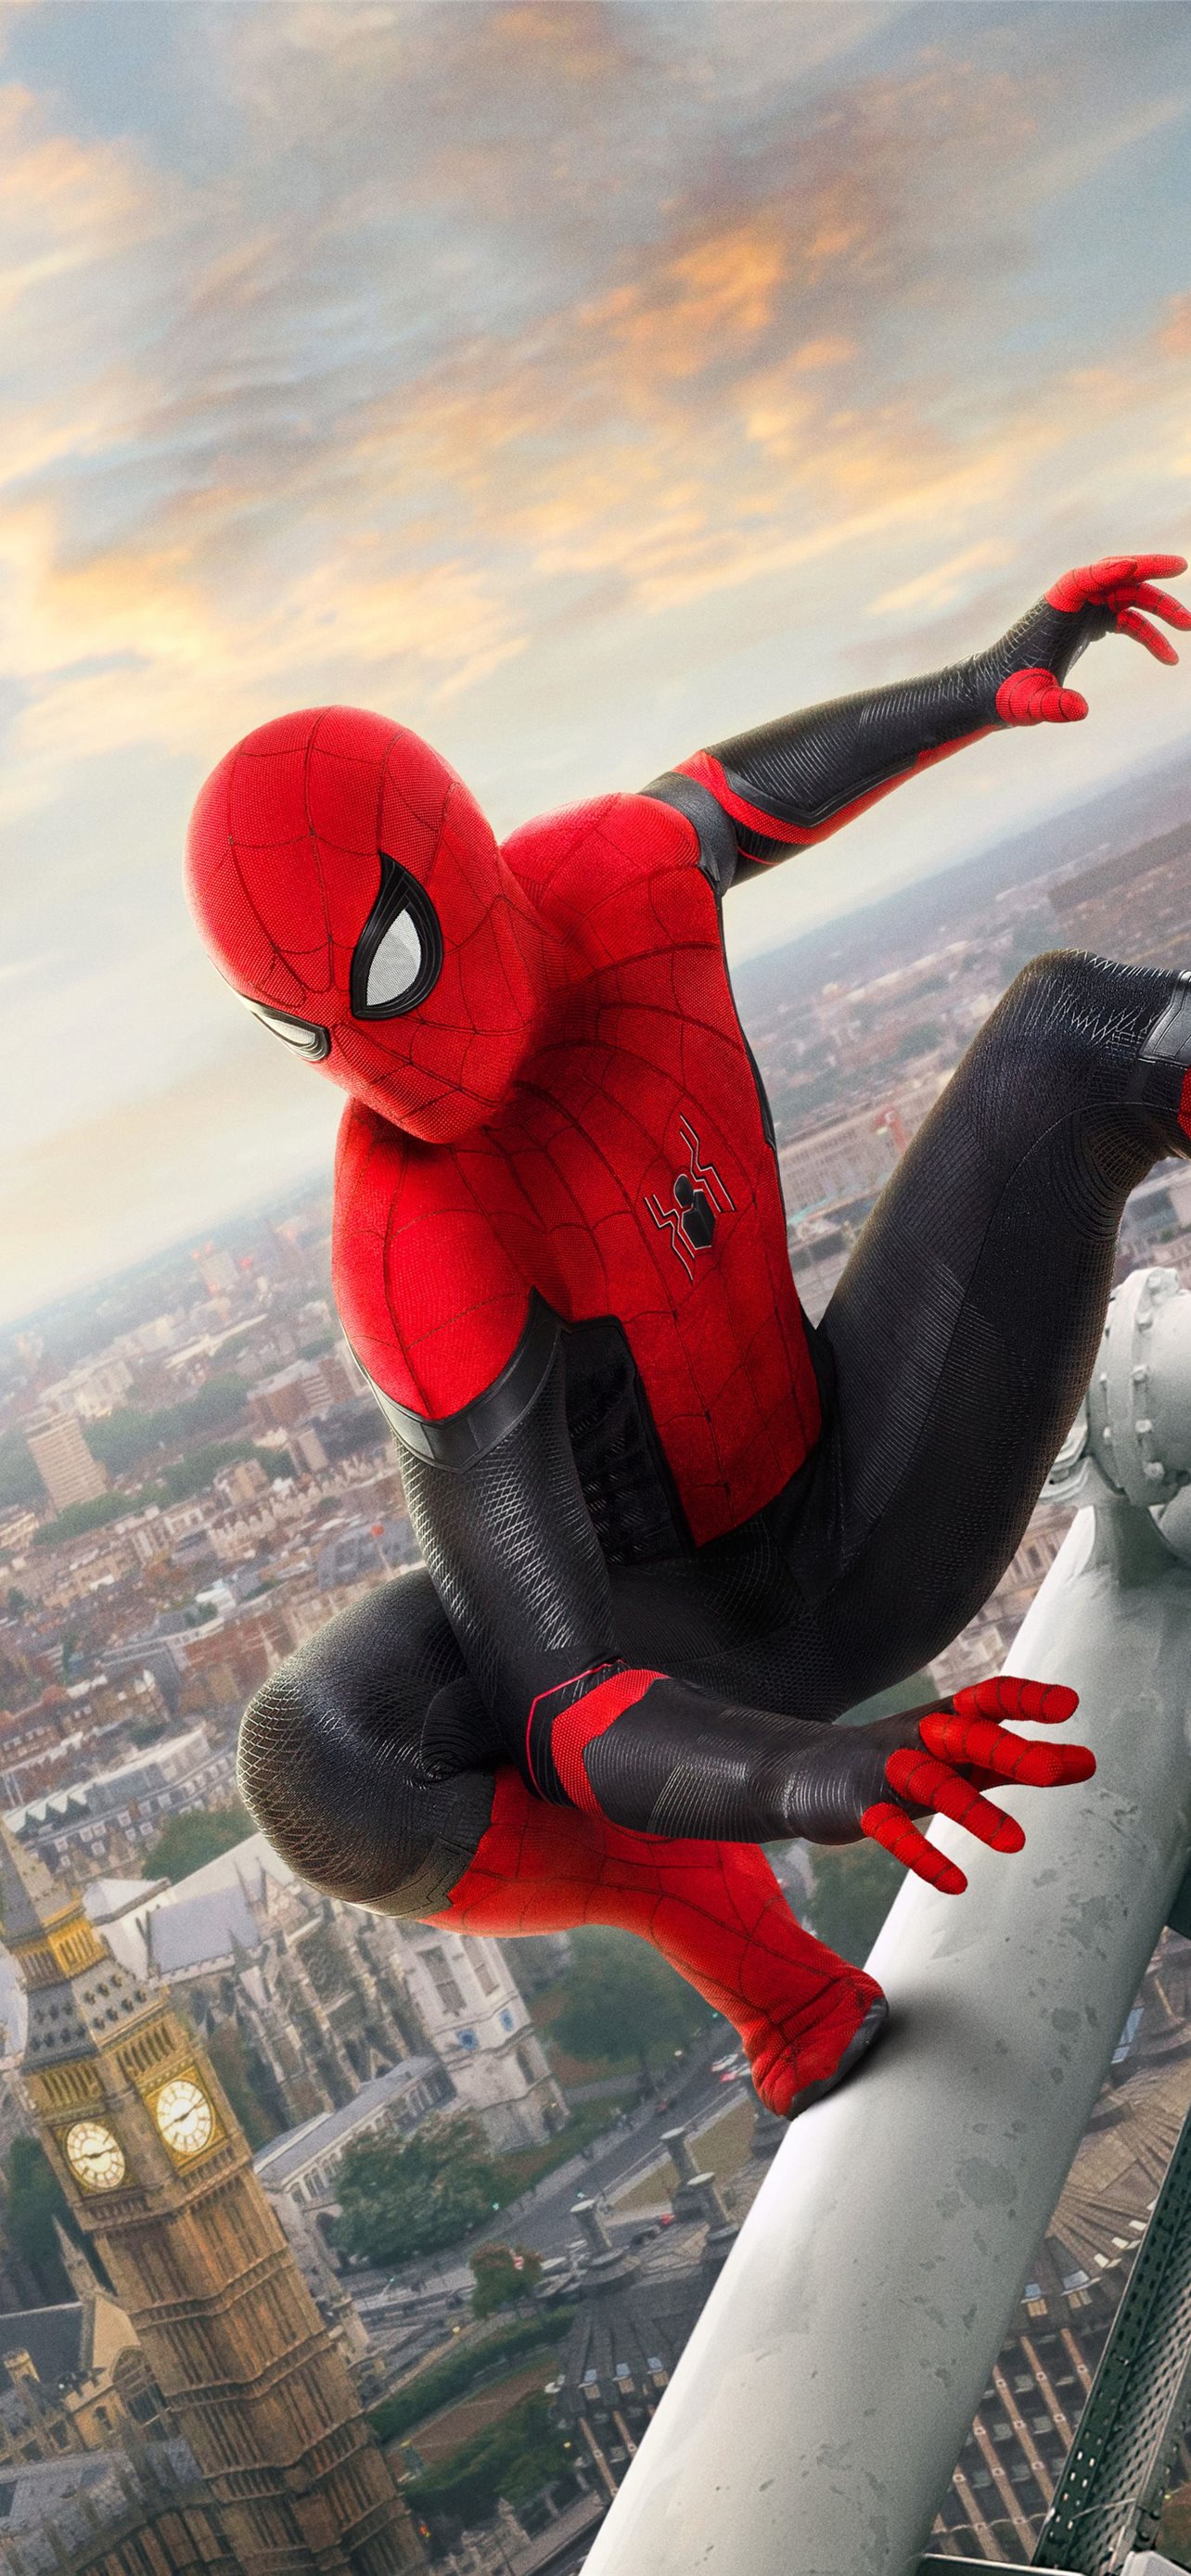 5k Spider Man Far From Home In Resolution iPhone Wallpapers Free Download